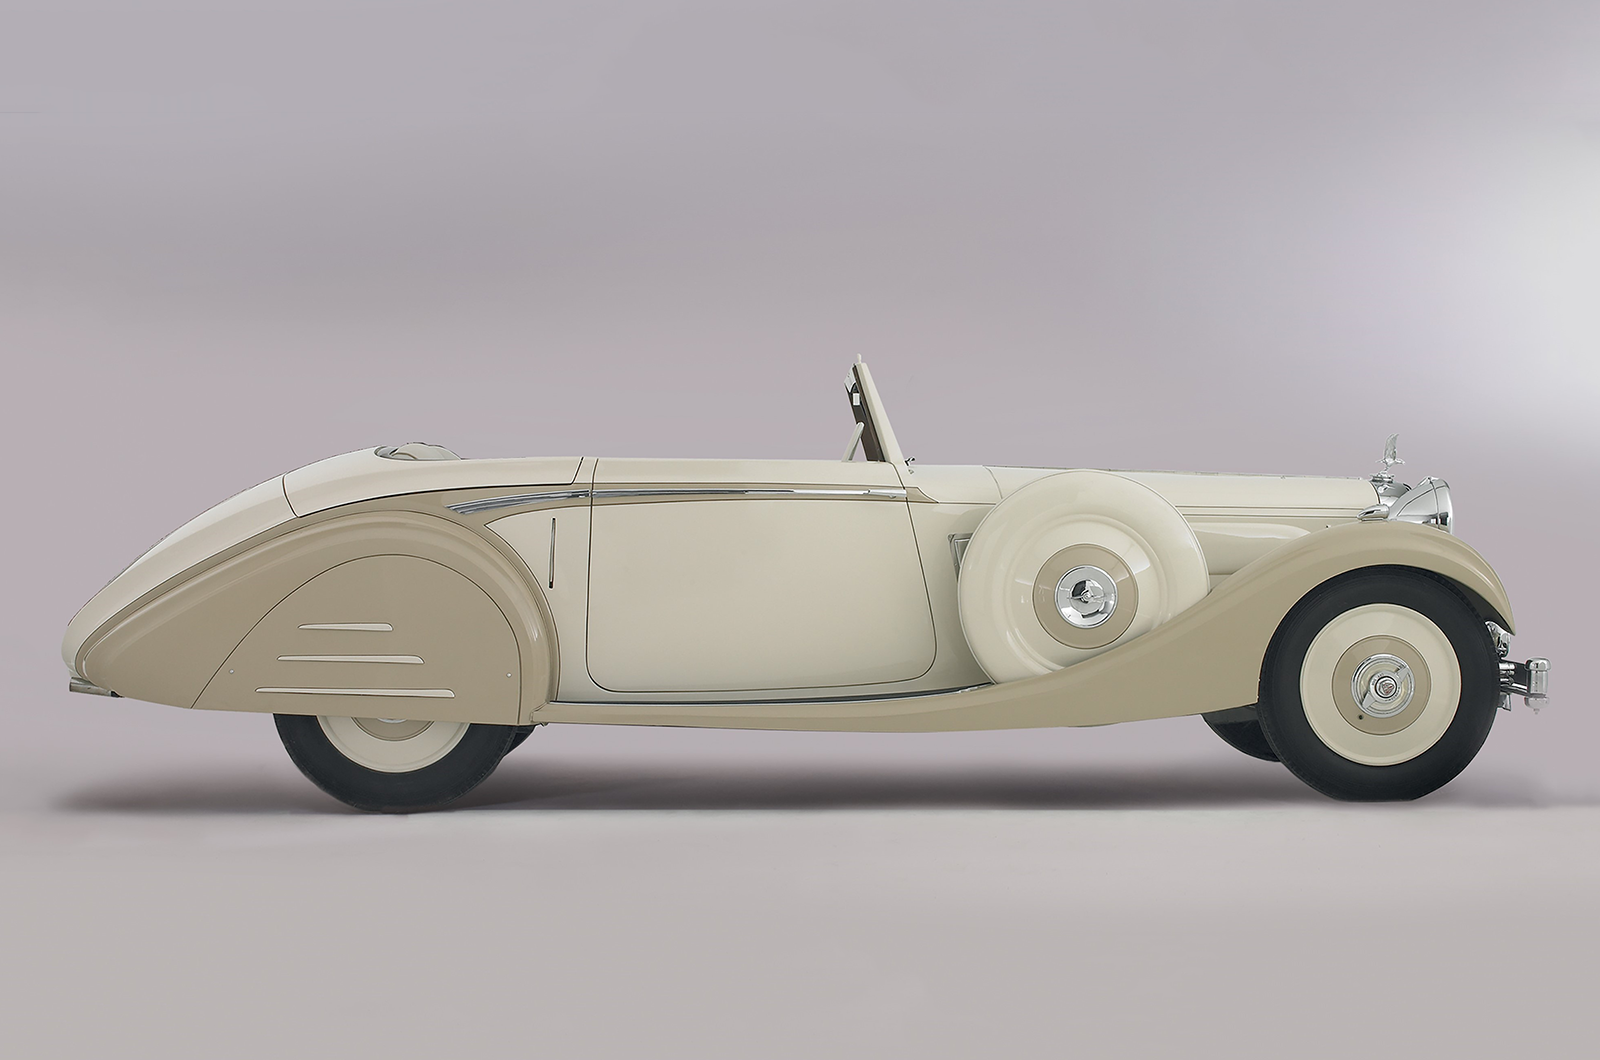 Classic & Sports Car – Alvis marks its centenary in style